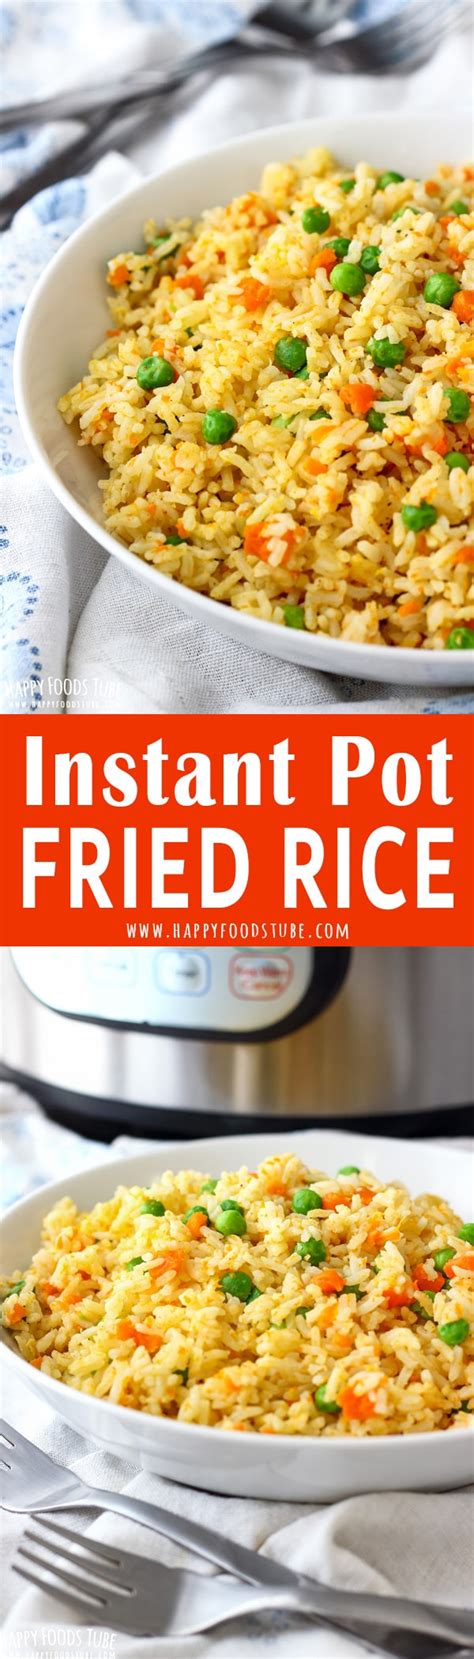 Add water and rice to the instant pot. Instant Pot Fried Rice - Pressure Cooker Fried Rice